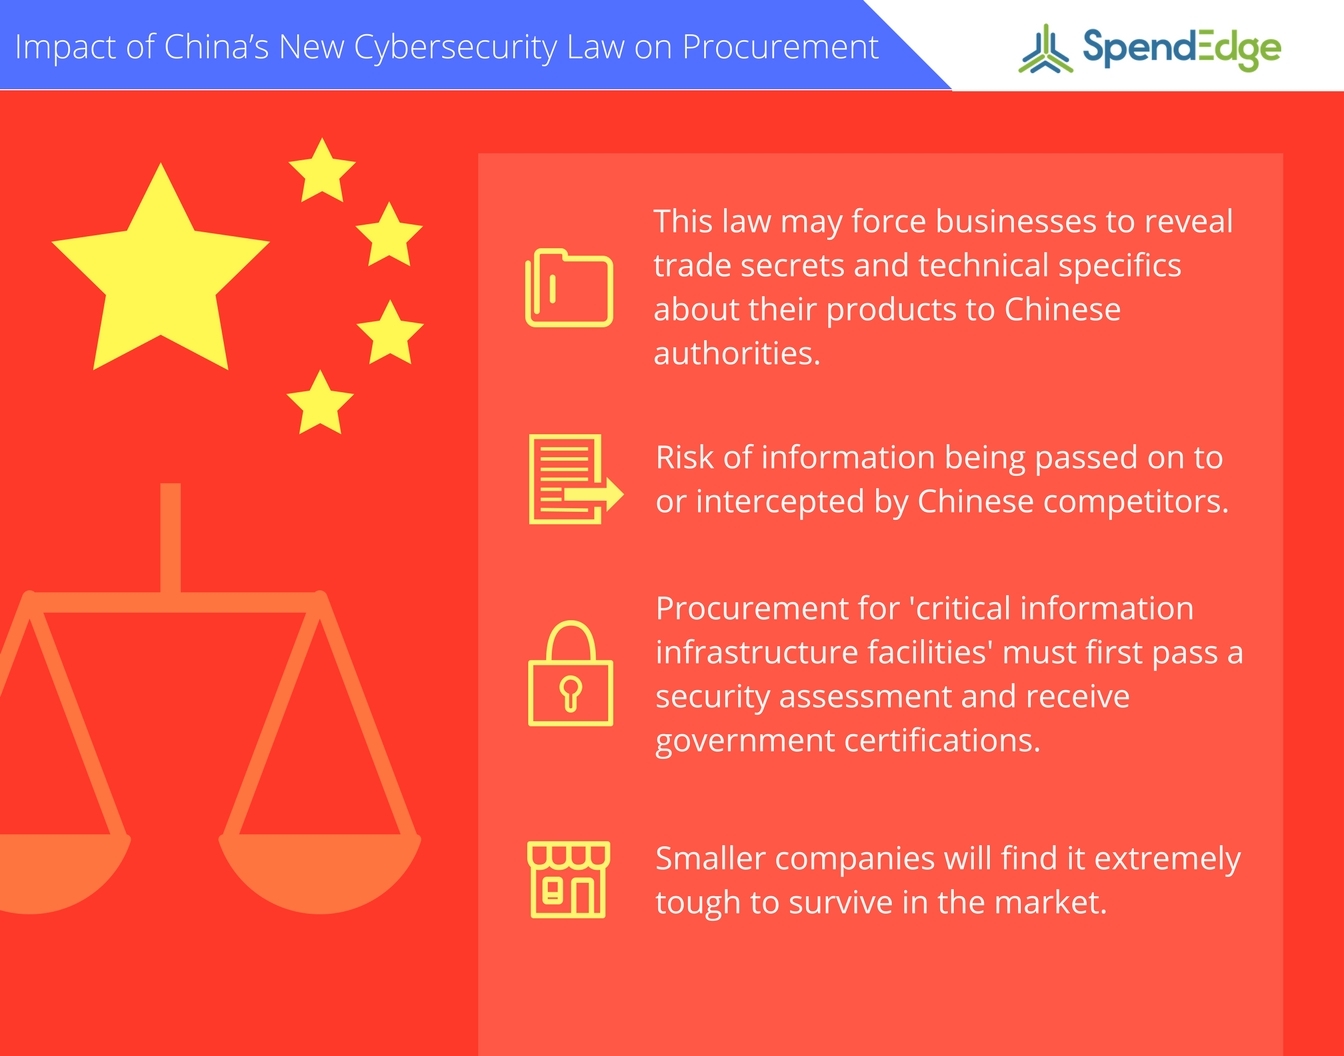 Chinas New Cybersecurity Law Will Trigger Procurement Complications Spendedge Business Wire 